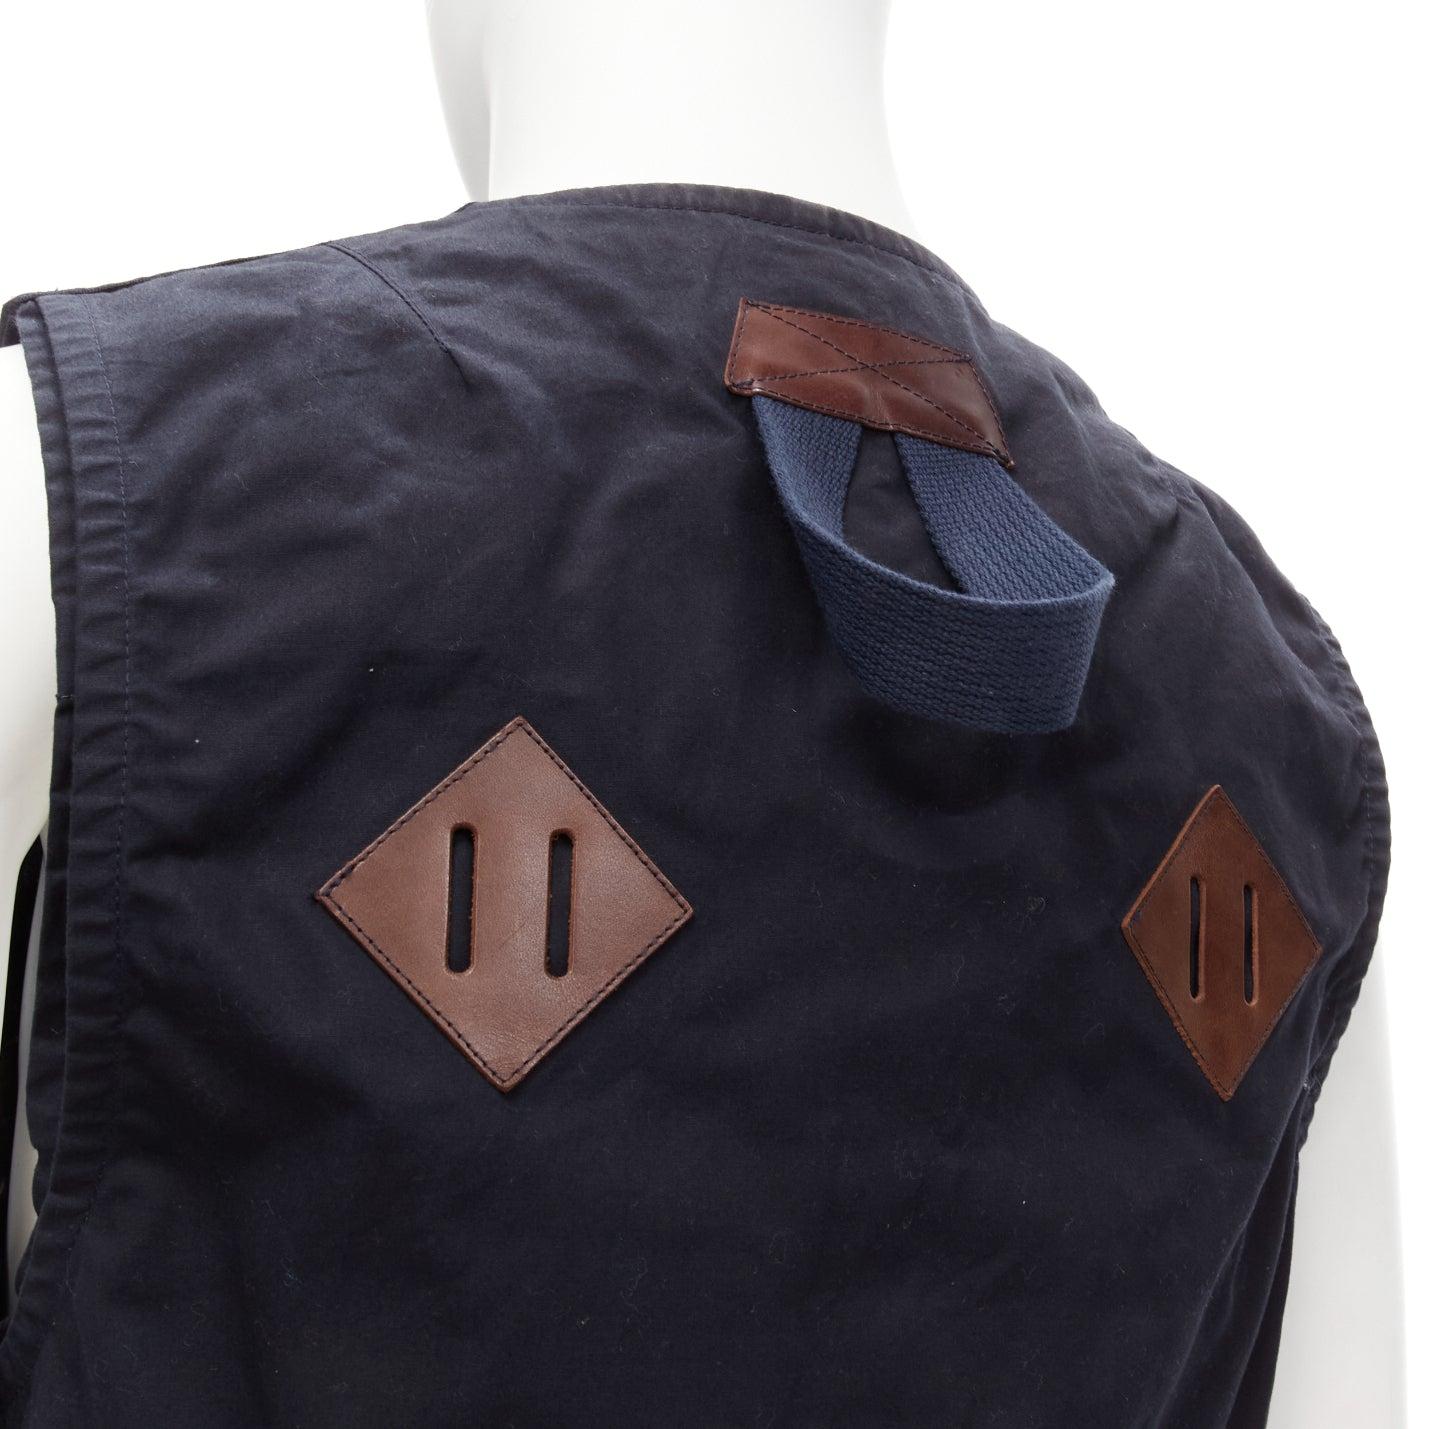 JUNYA WATANABE MAN HERVIER 2013 Reversible navy brown suede trim fisherman vest M
Reference: JSLE/A00030
Brand: Junya Watanabe
Collection: MAN HERVIER 2013
Material: Cotton, Leather
Color: Black, Brown
Pattern: Solid
Closure: Button
Lining: Black